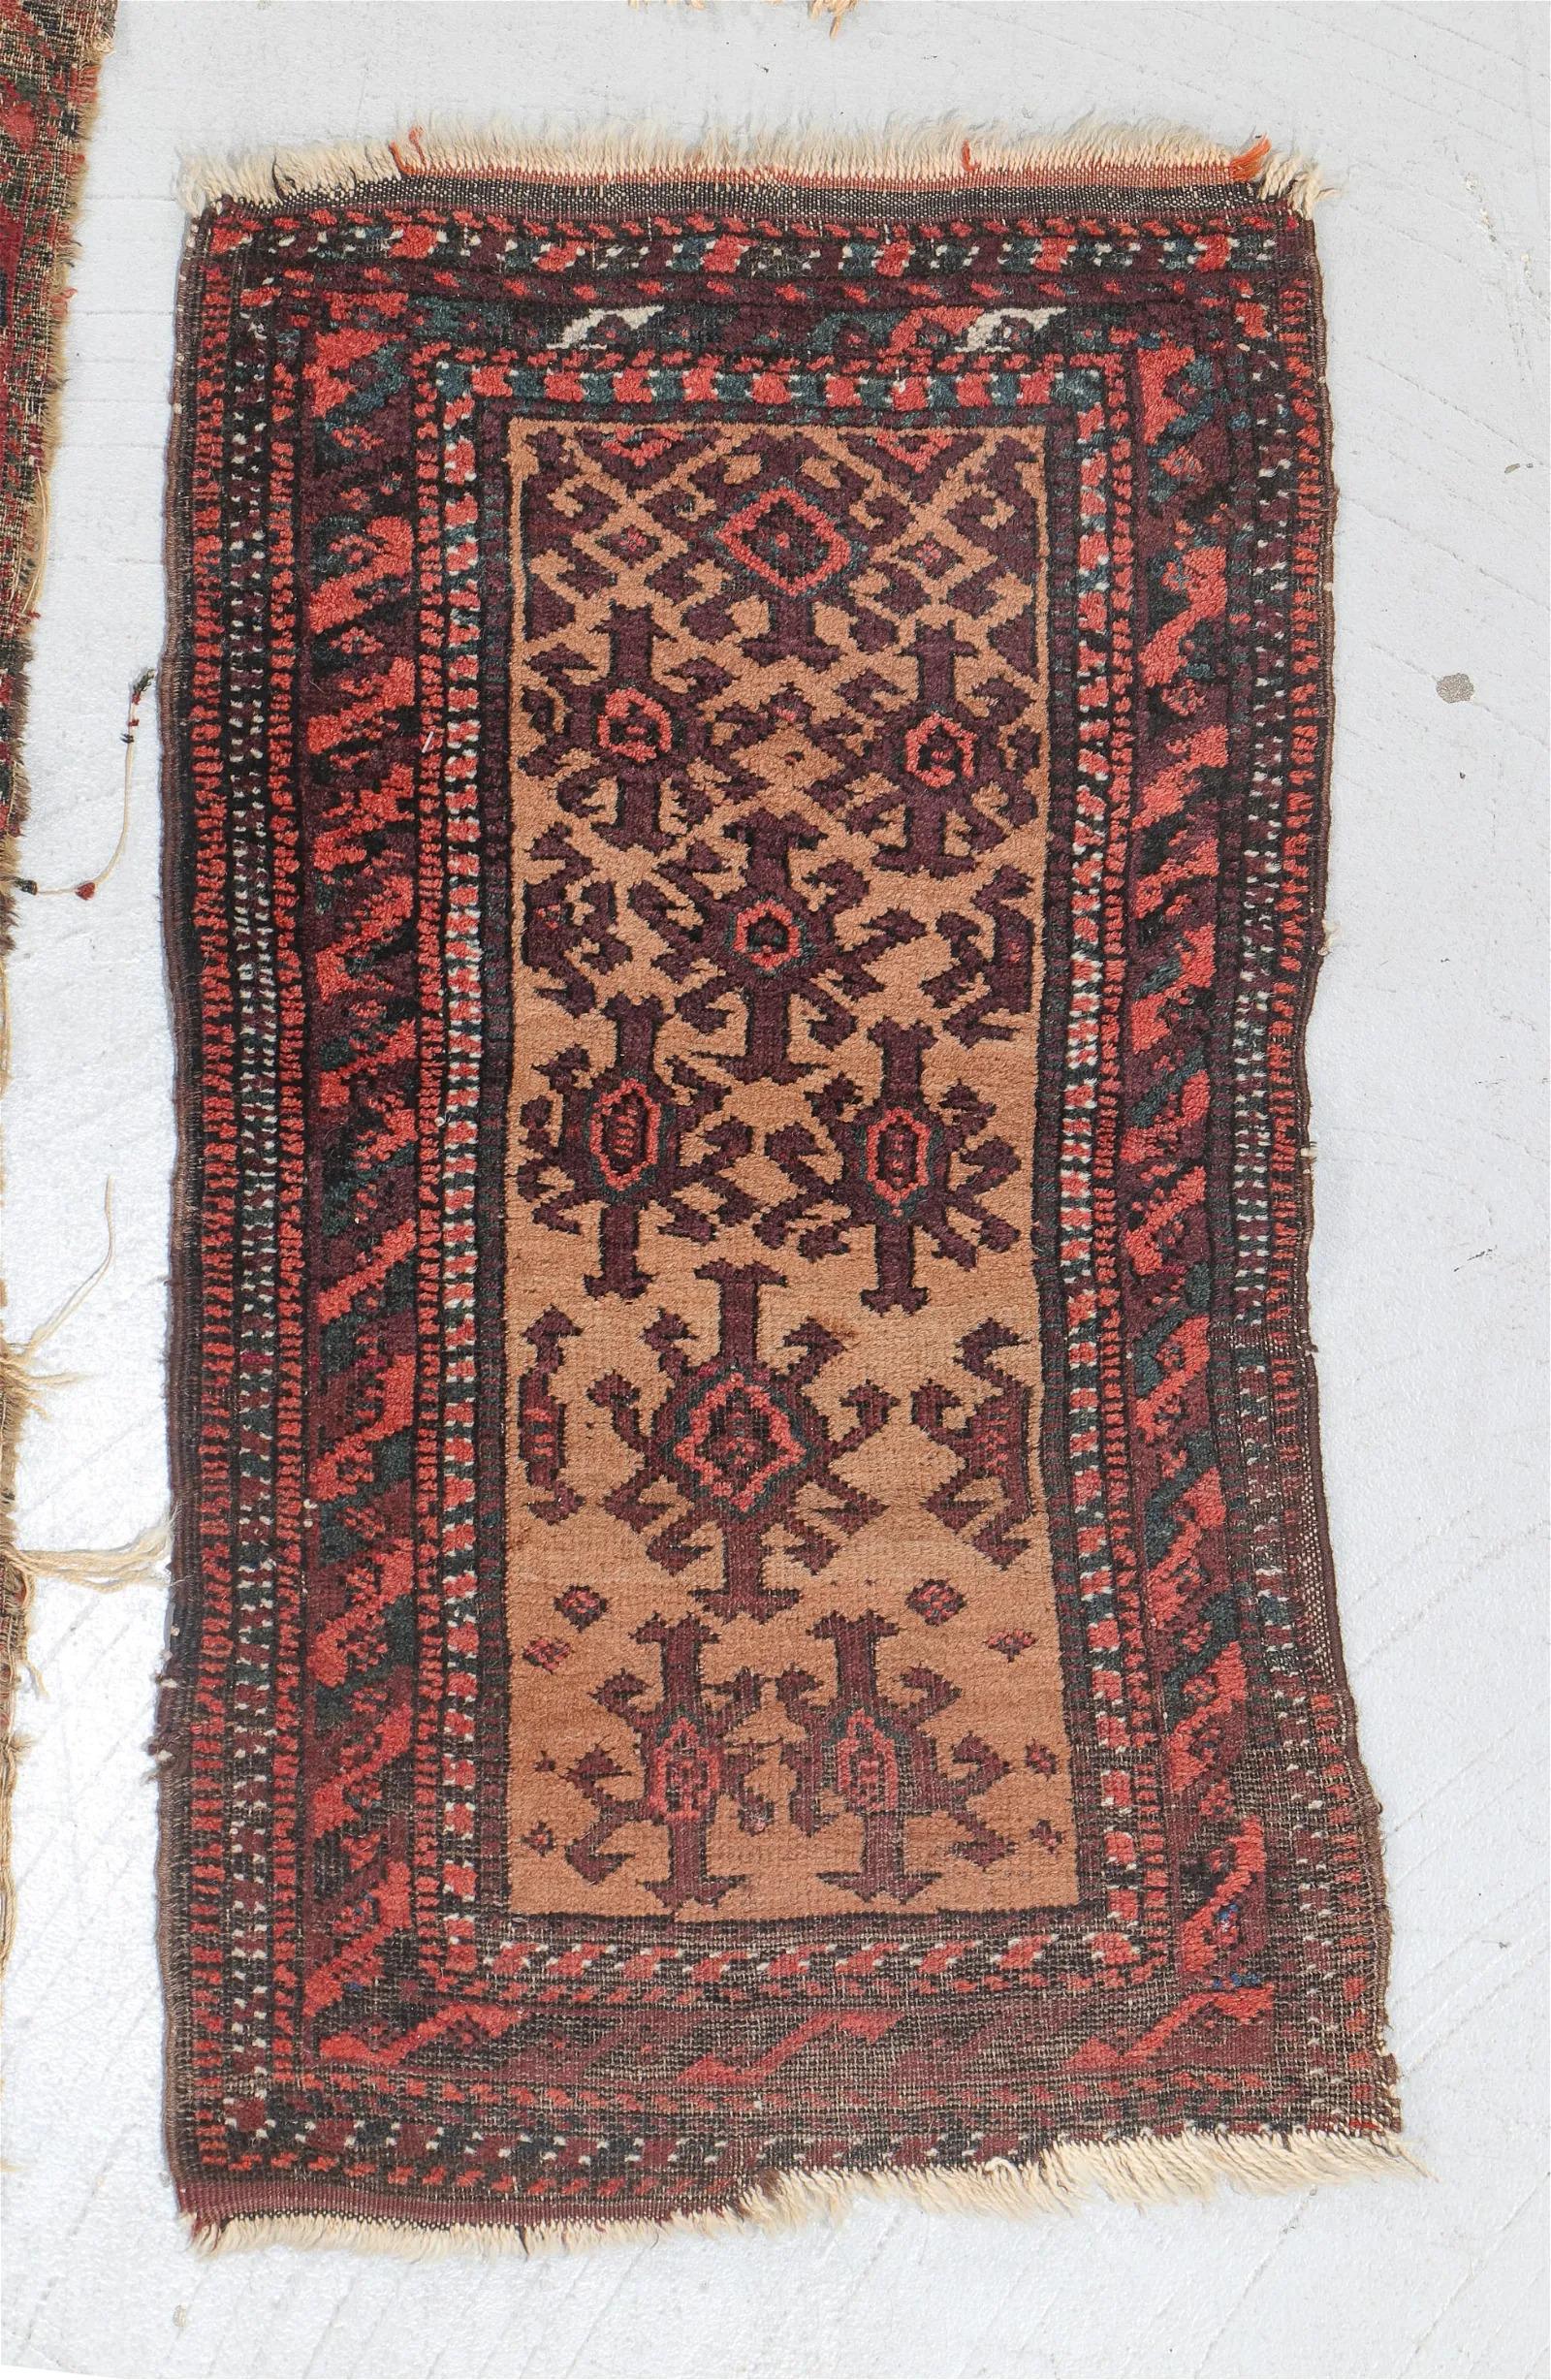 Lot of 9 Antique Afghan Baluch Collectible Rugs 1.6' x 3.2', 1870s - 2B29 For Sale 2